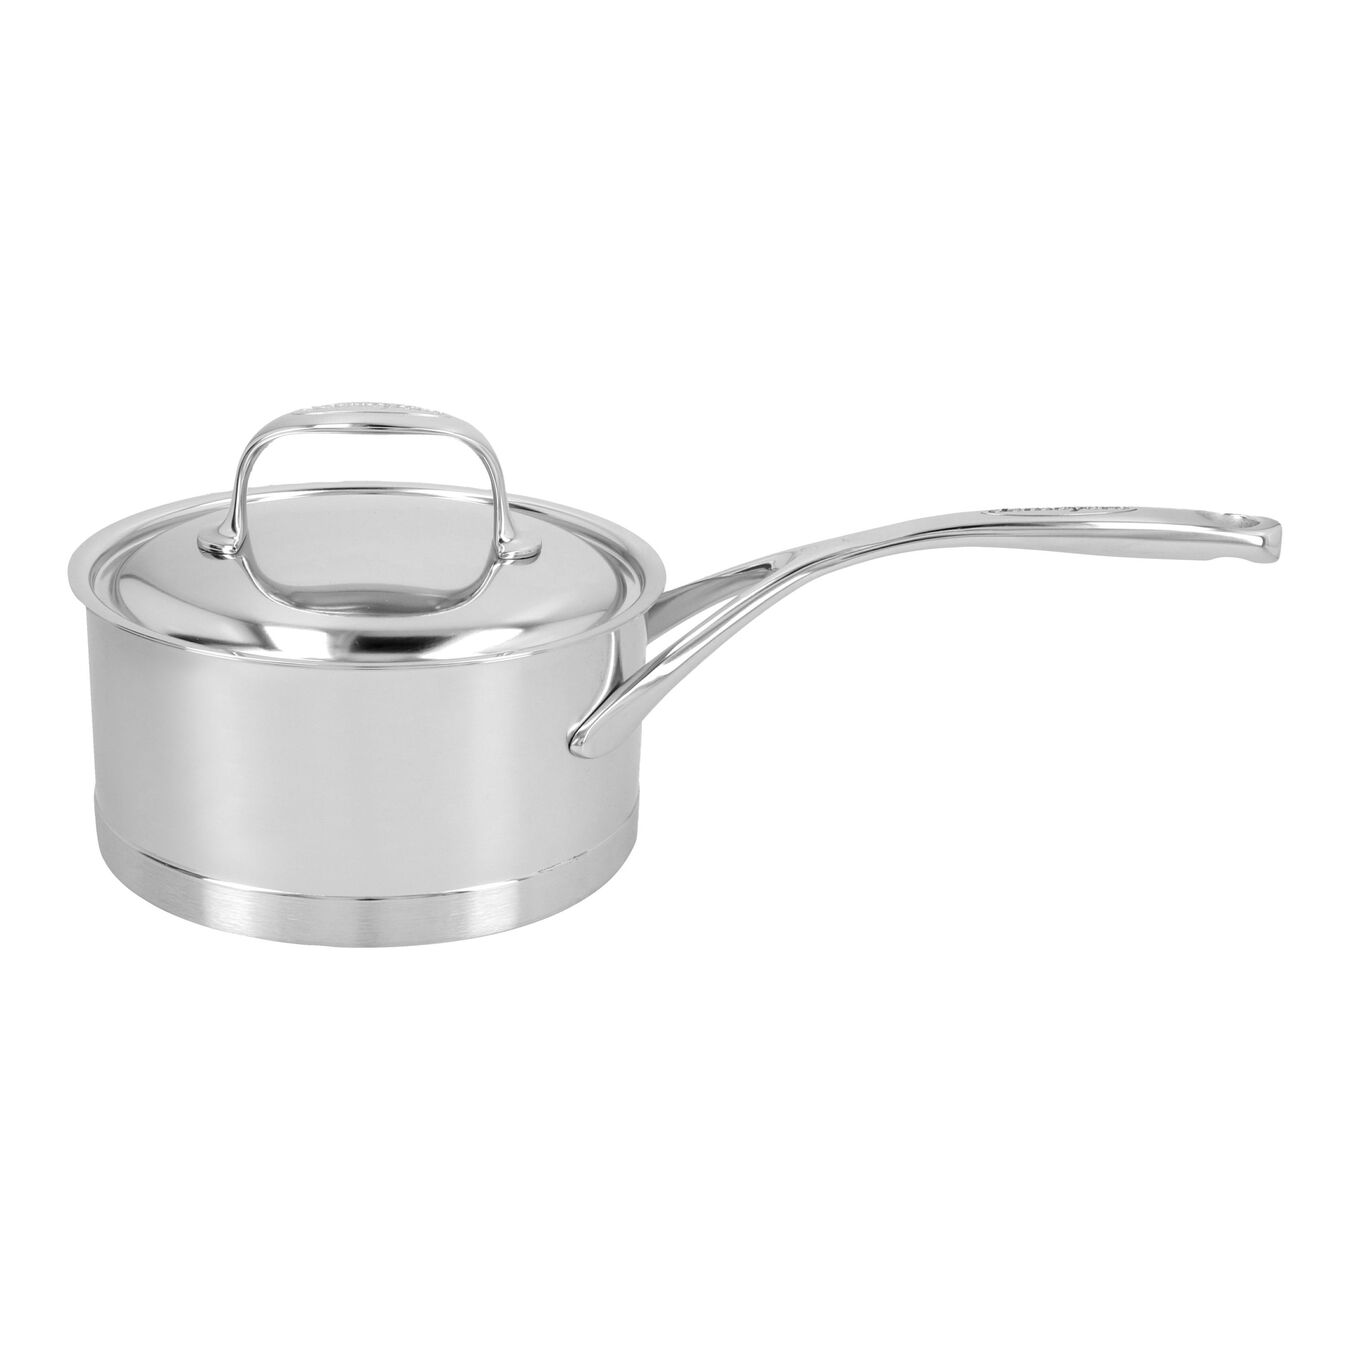 1.5 l 18/10 Stainless Steel round Sauce pan with lid, silver,,large 1